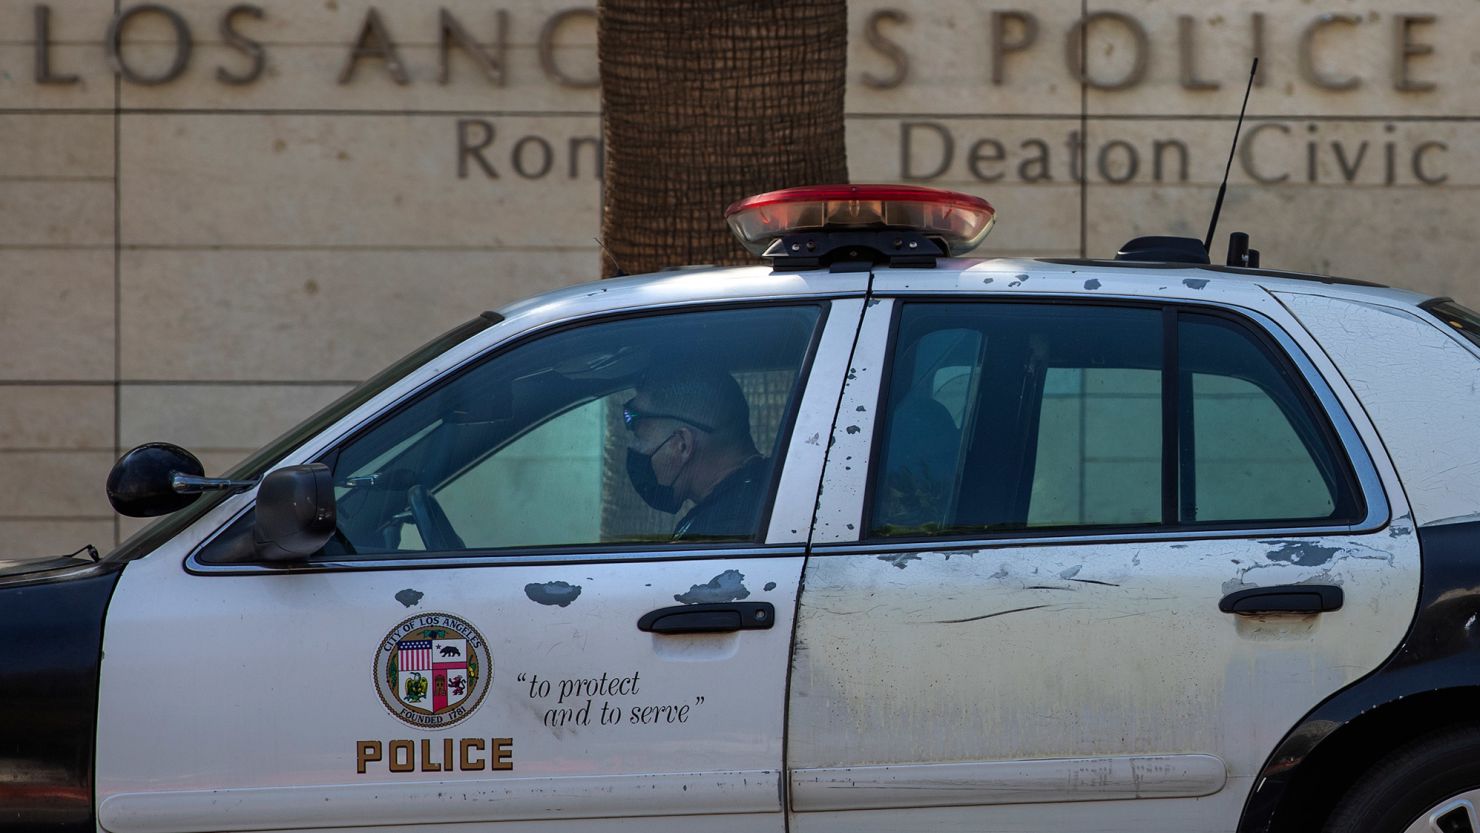 A member of the LAPD sits inside his squad car, parked outside their headquarters on 1st St. in downtown Los Angeles.